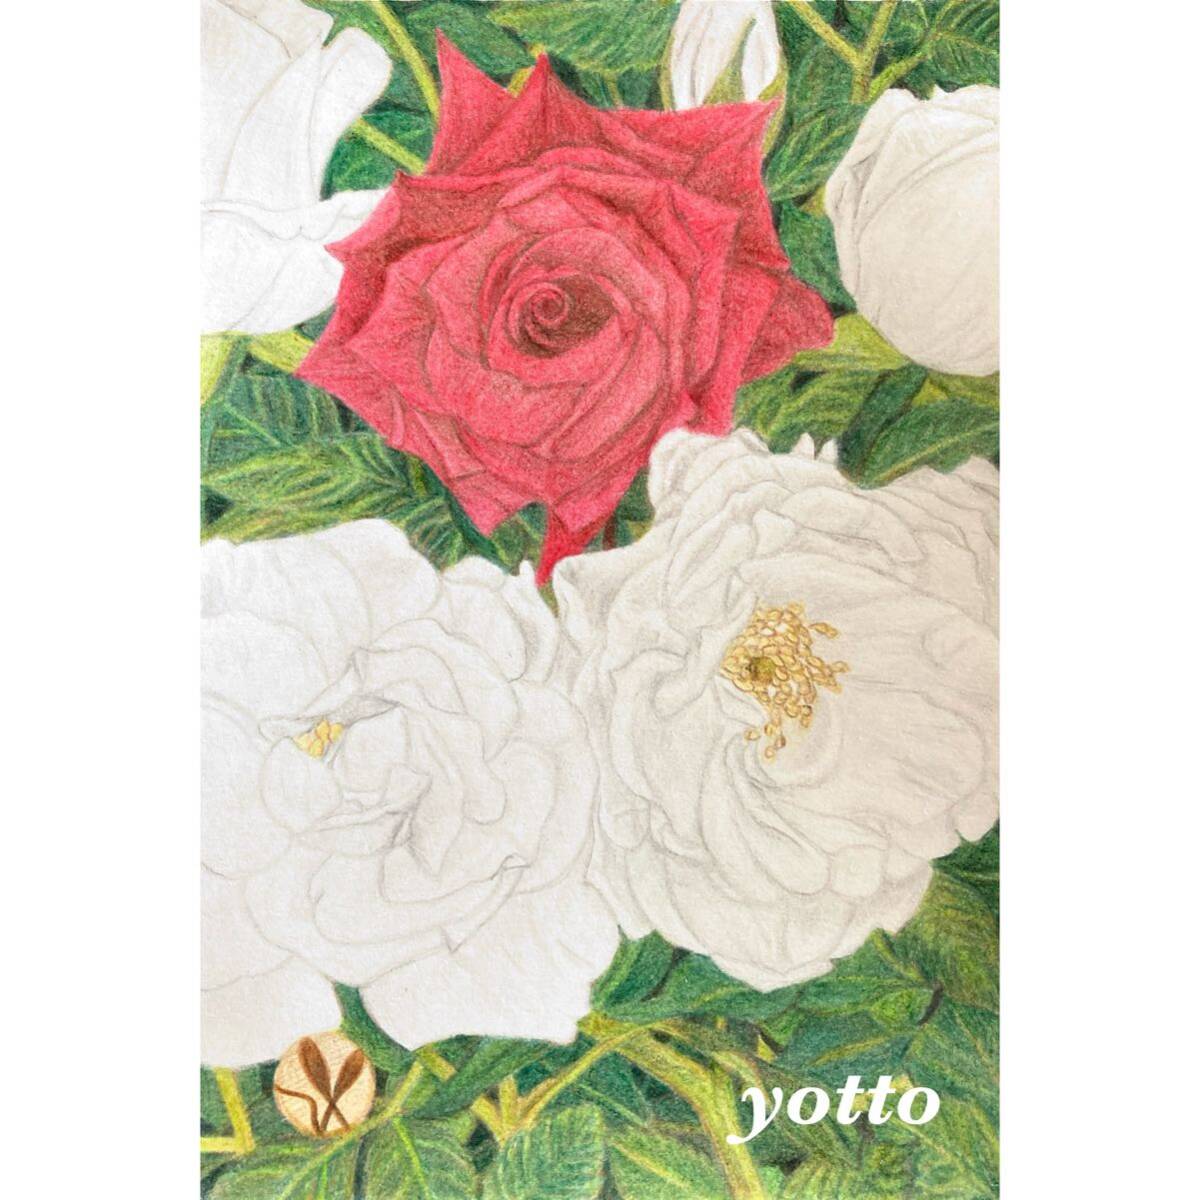 Colored pencil drawing Aya《13》~Rose~ Postcard size/with frame◇◆Hand-drawn◇Original drawing◆Flower◇◆yotto, artwork, painting, pencil drawing, charcoal drawing